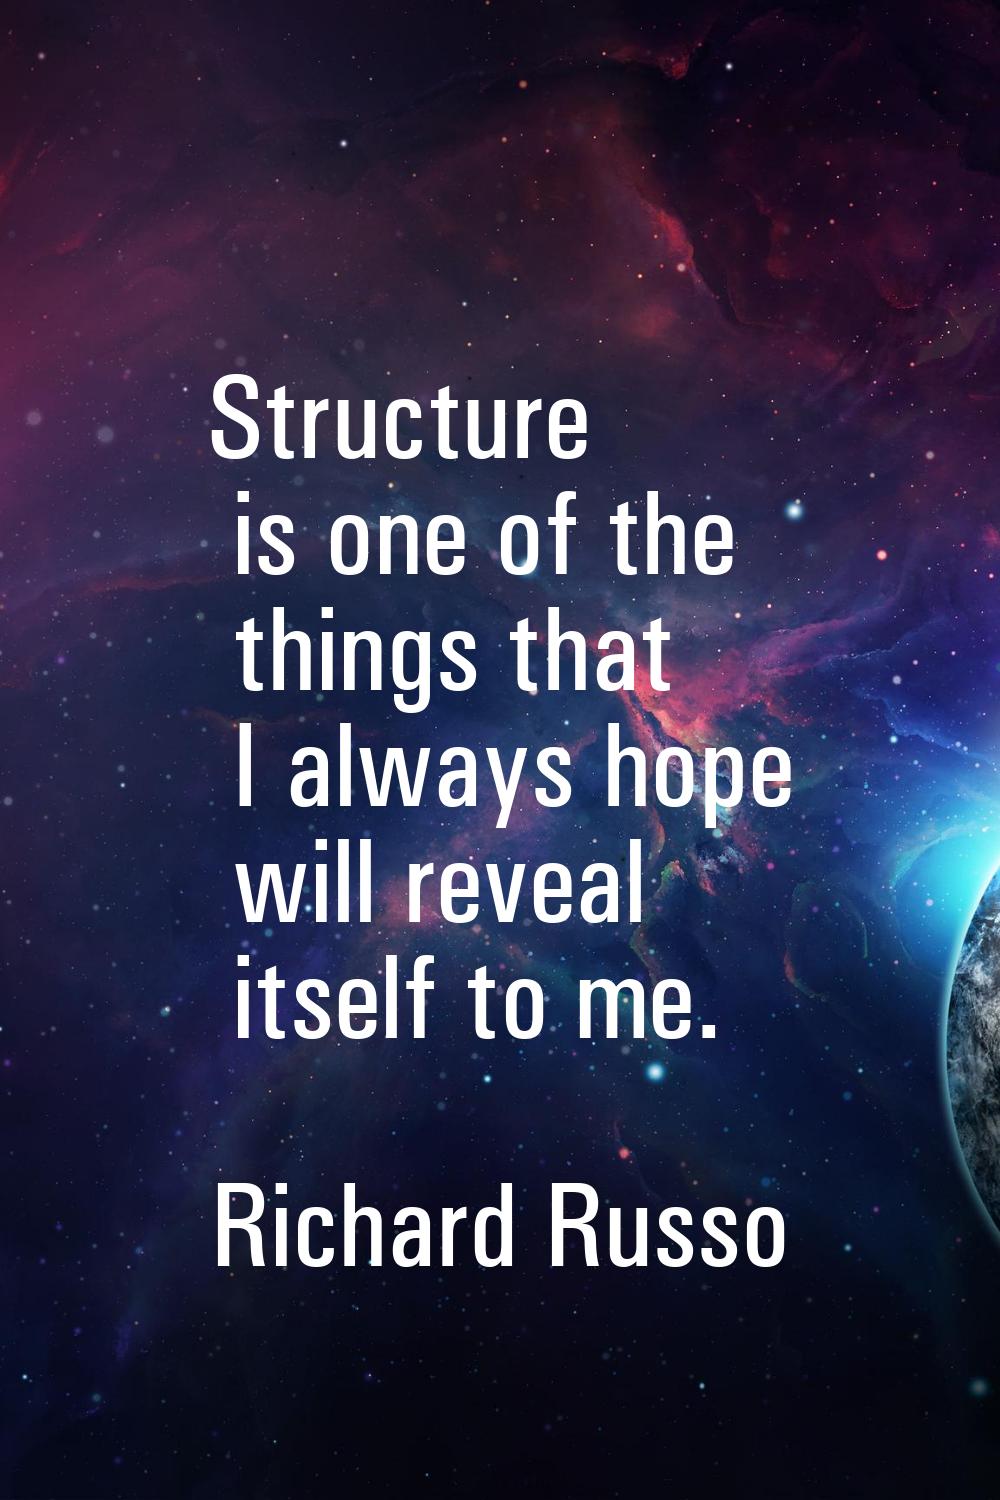 Structure is one of the things that I always hope will reveal itself to me.